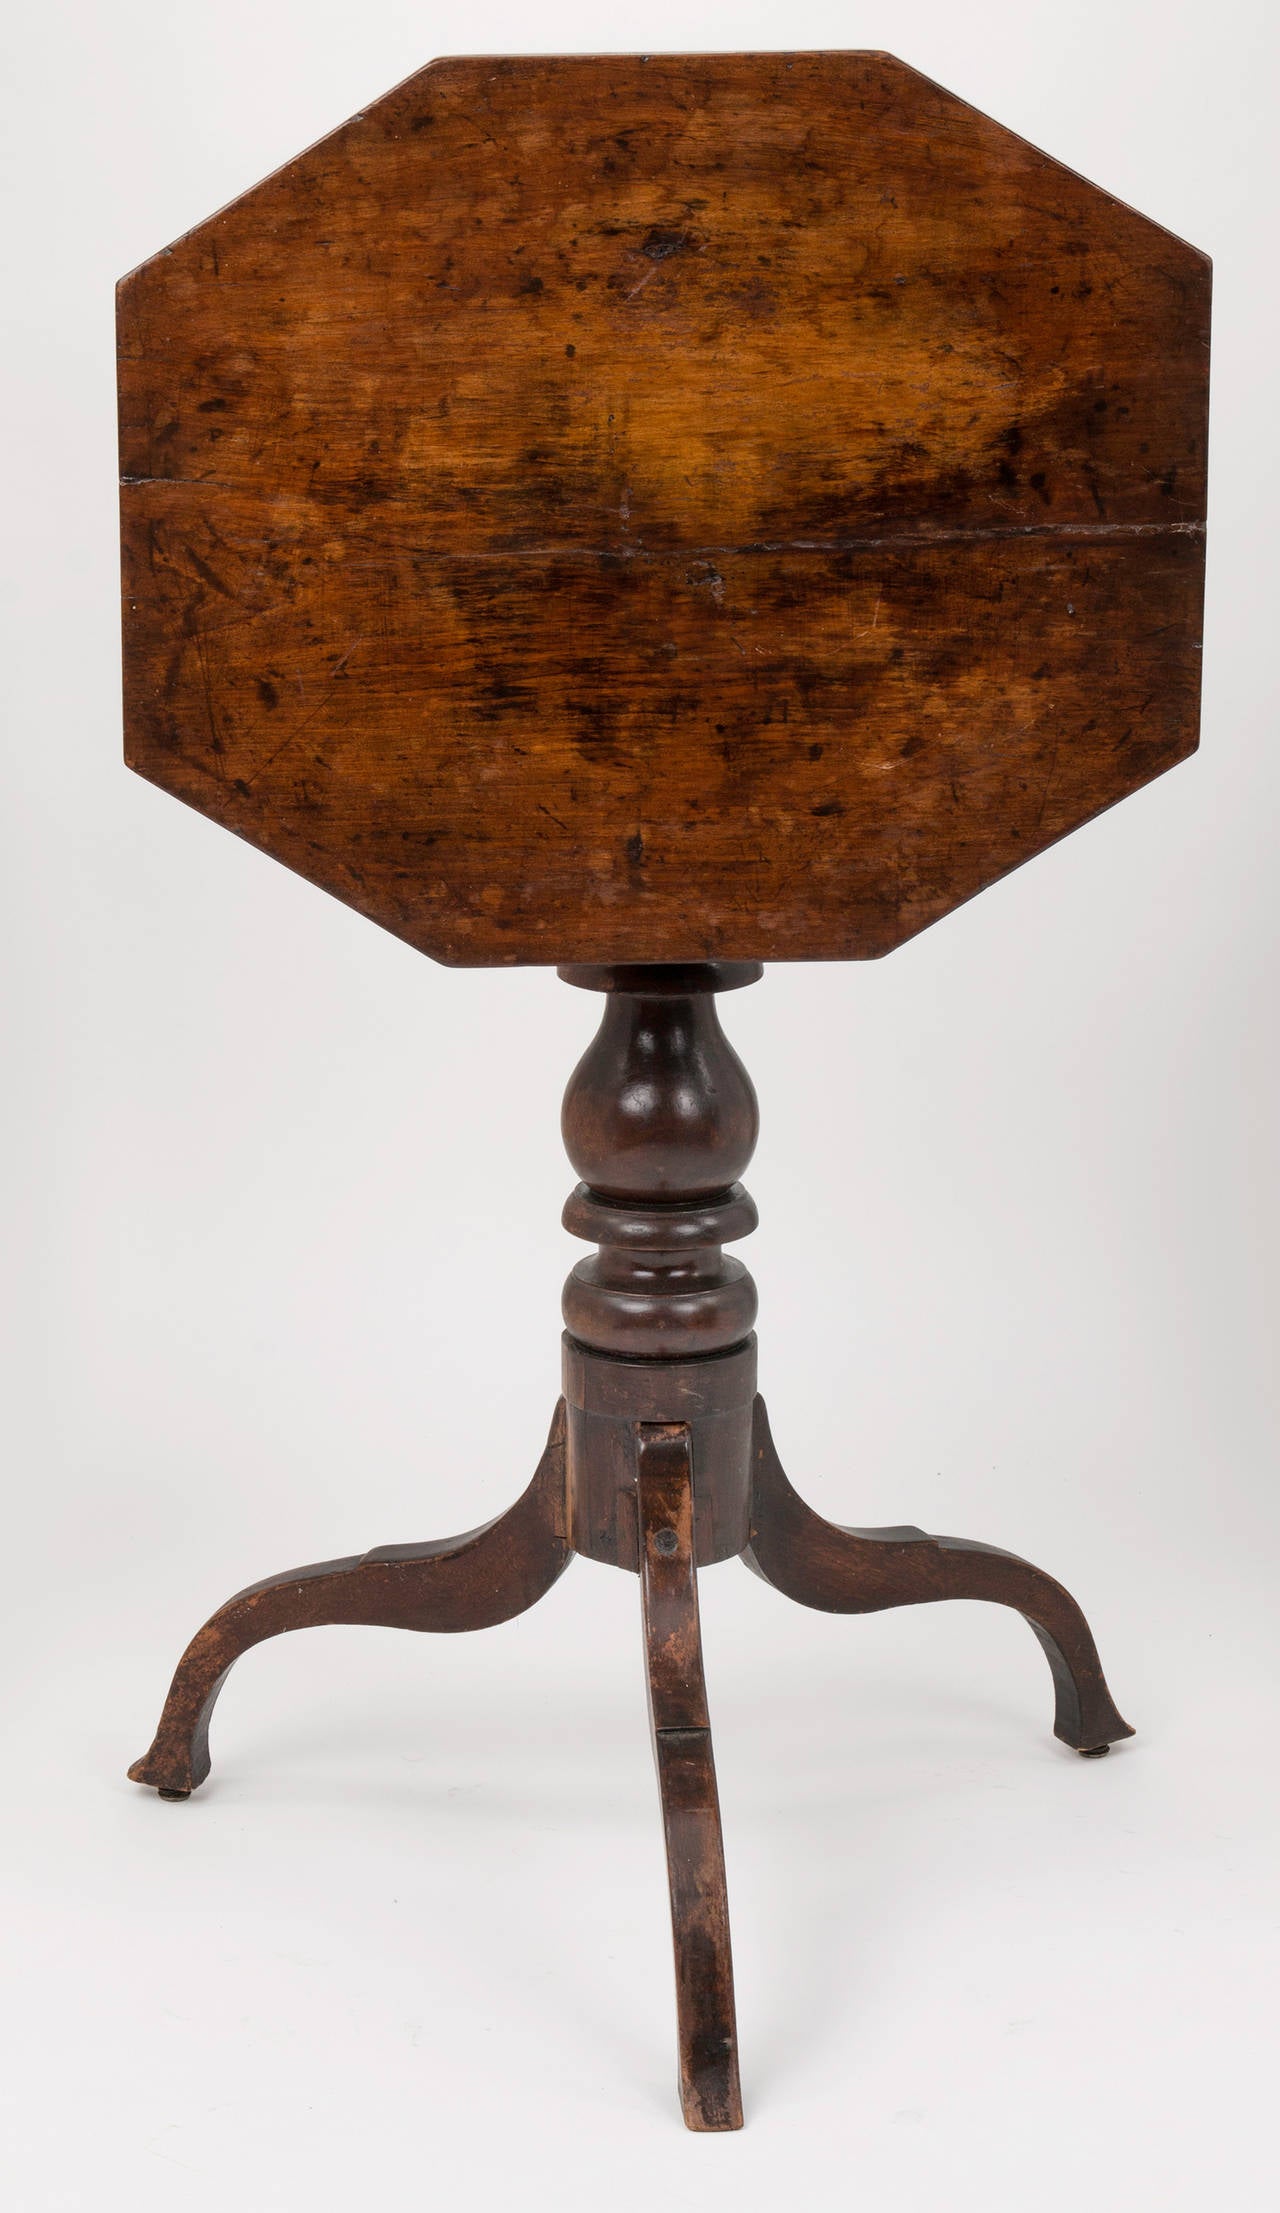 Charming little octagon  shape tilt top table.  Nicely turned pedestal with simple curved  tripod lega.  19c table nicely aged with latch underneath later replaced.  Height is 38